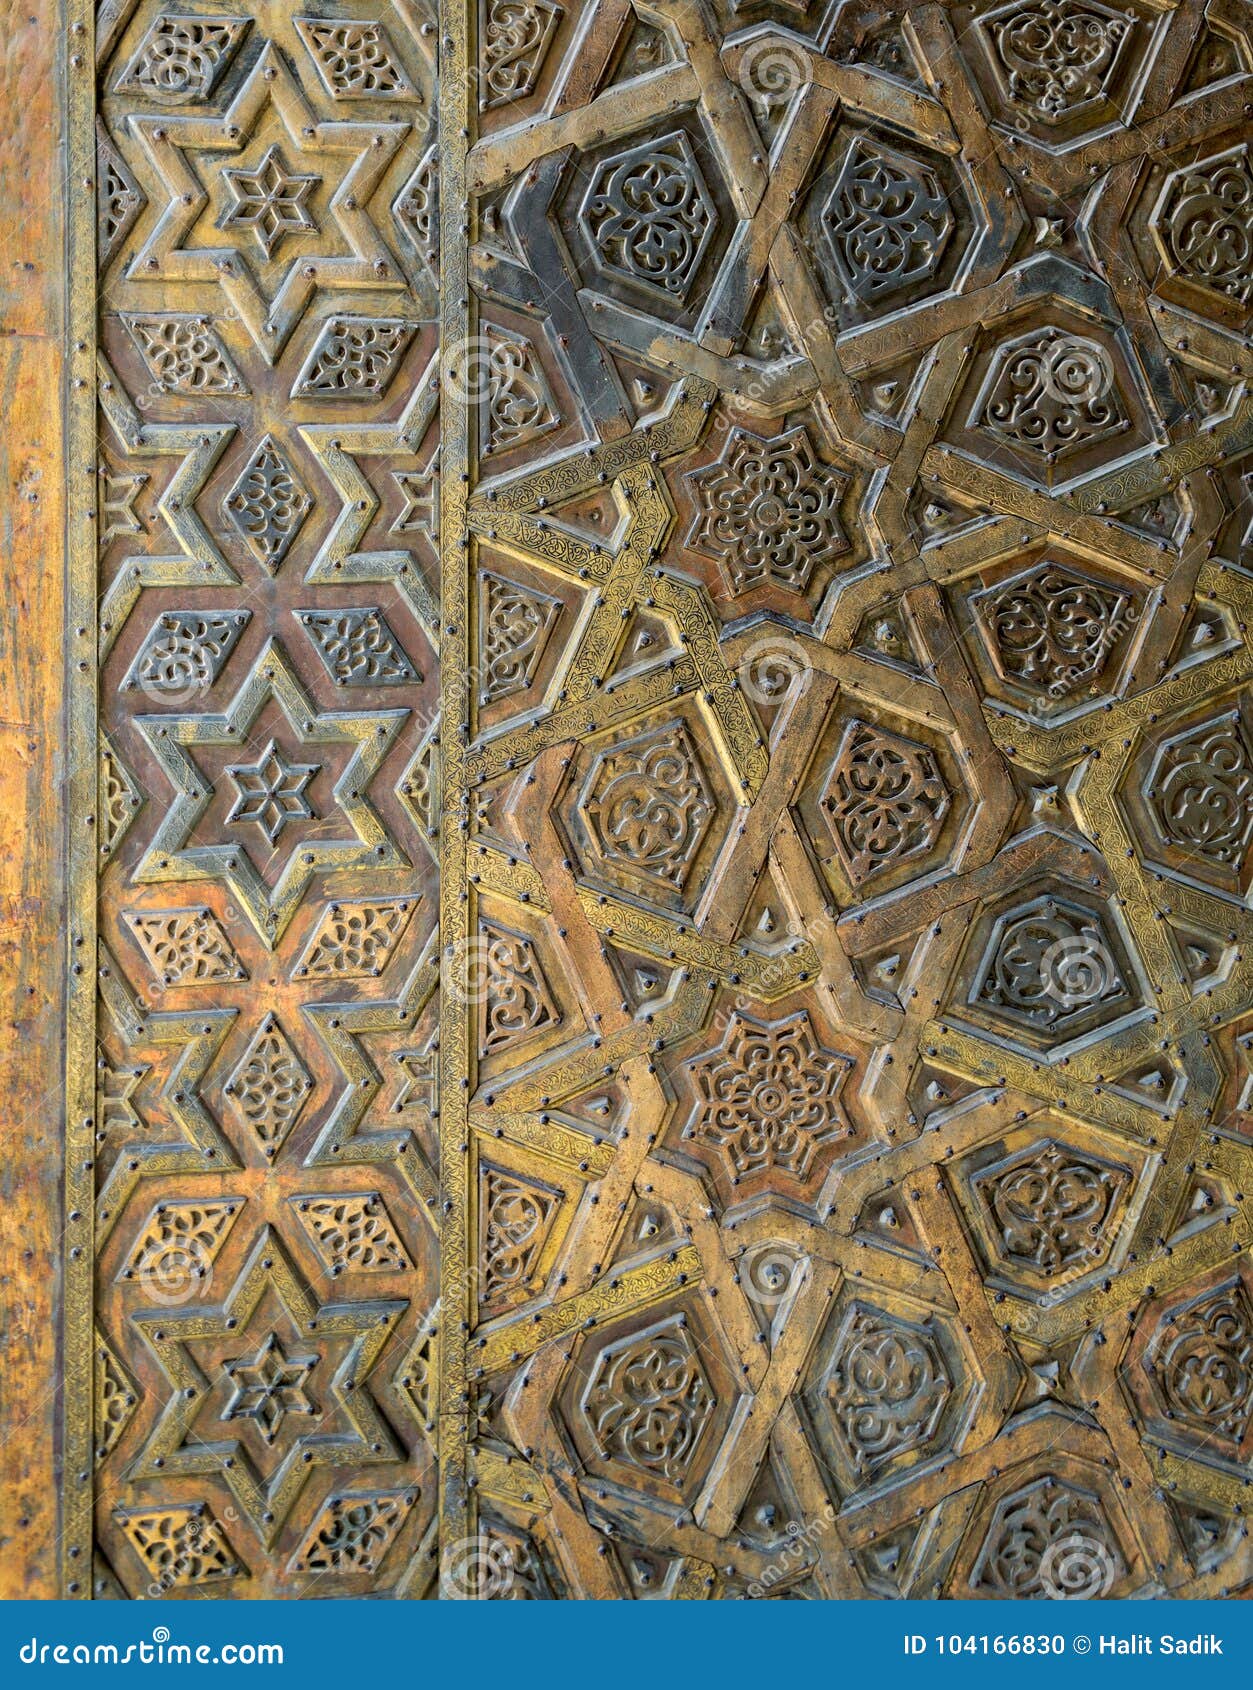 ornaments of the bronze-plate door of sultan qalawun mosque, old cairo, egypt